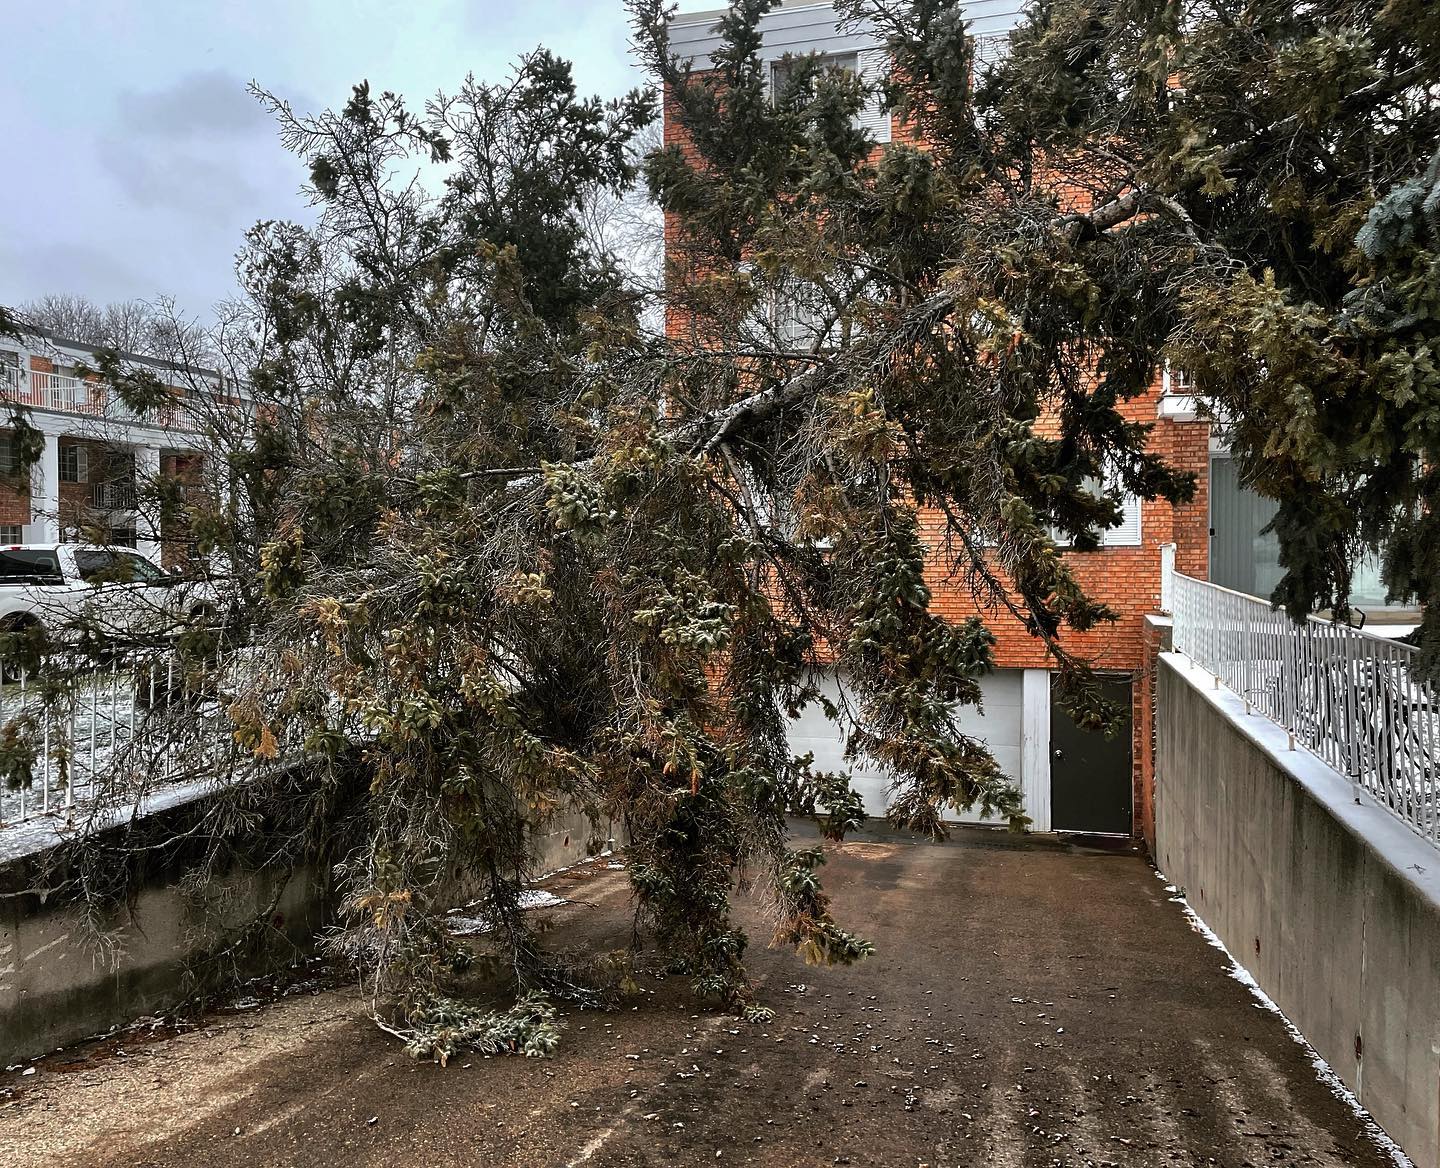 A tree knocked over in a storm that will need emergency tree removal service
